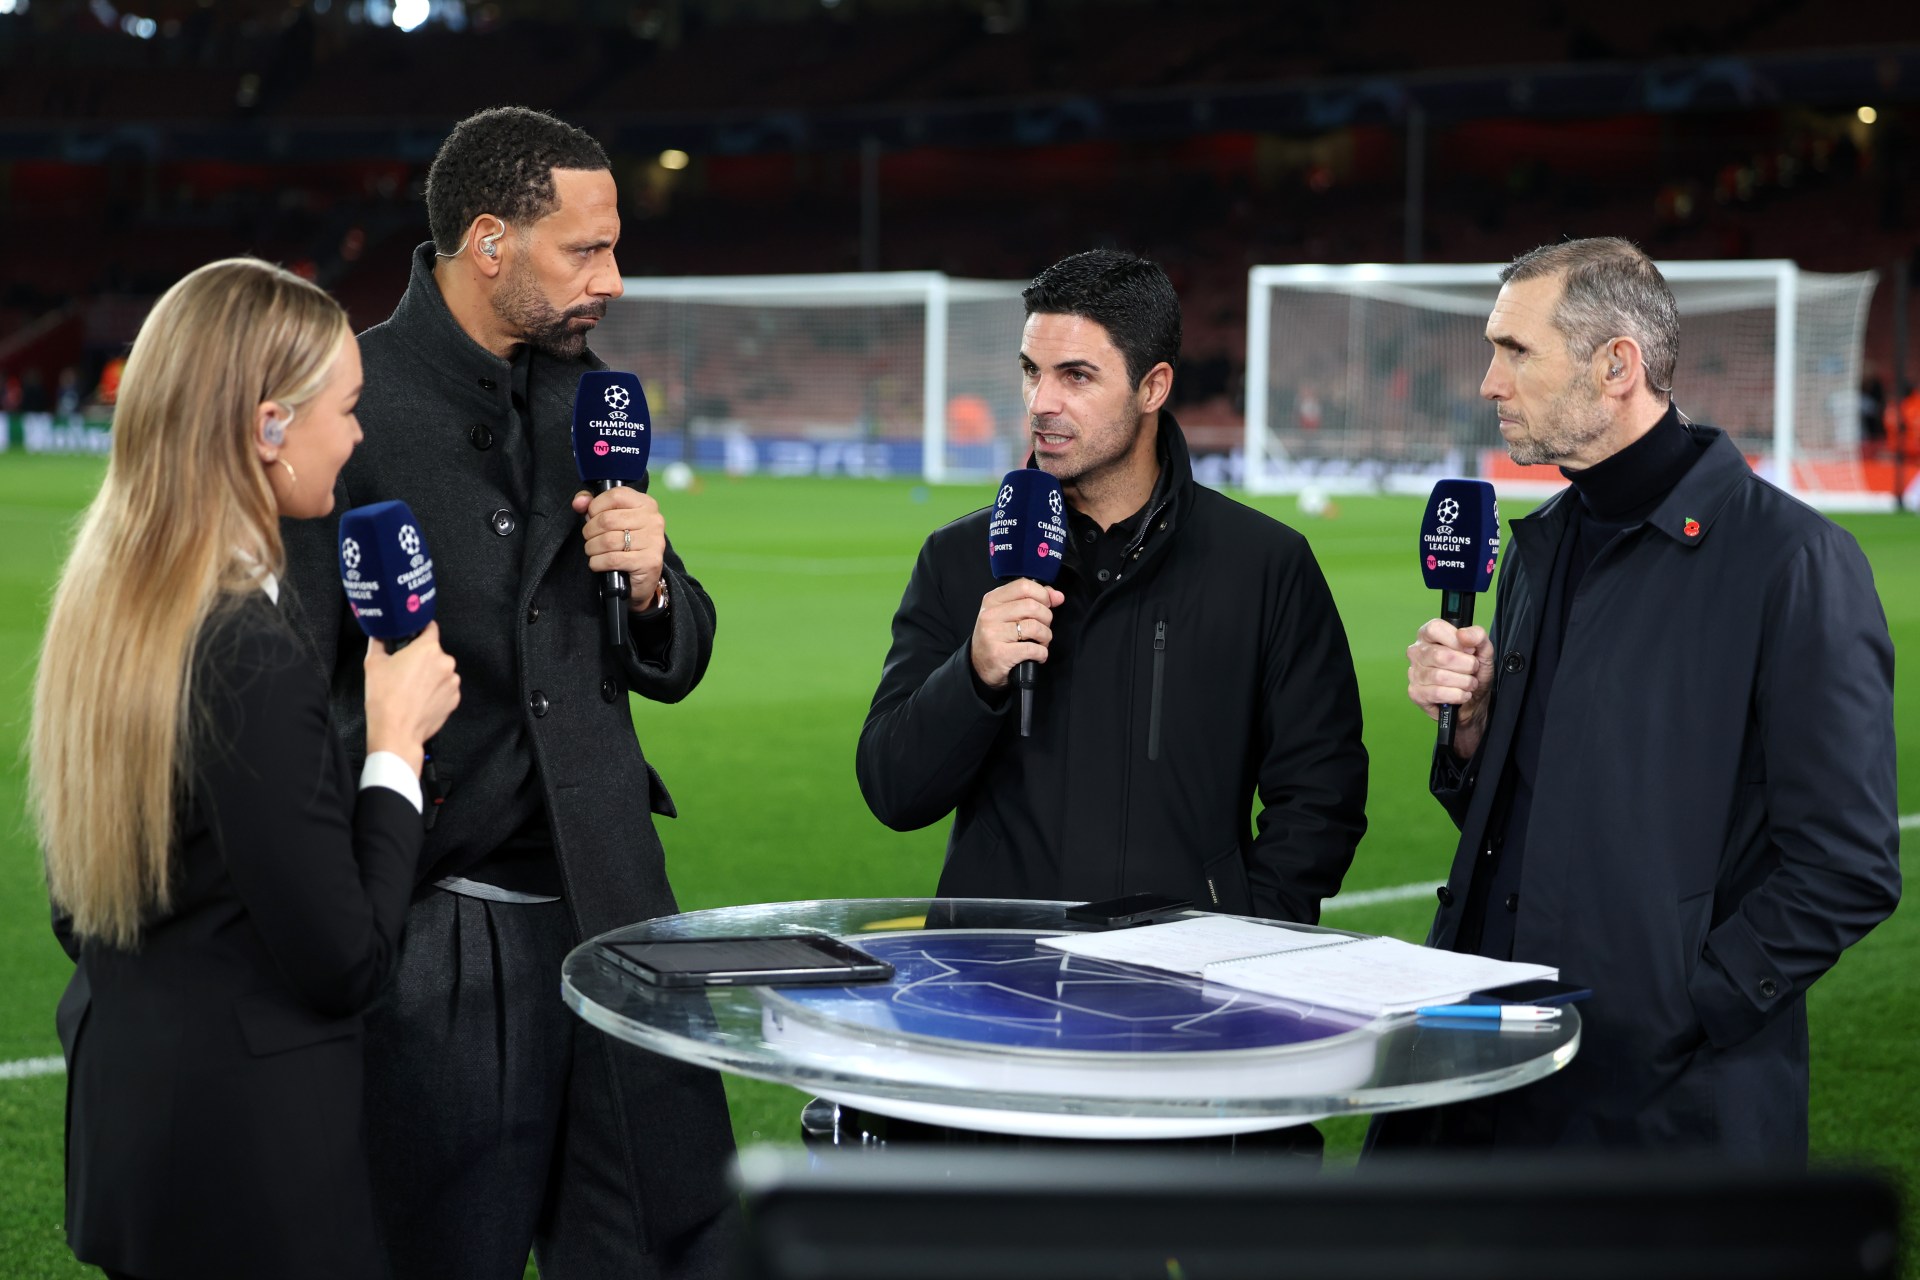 mikel arteta would '100 per cent' leave arsenal to manage man utd, says rio ferdinand